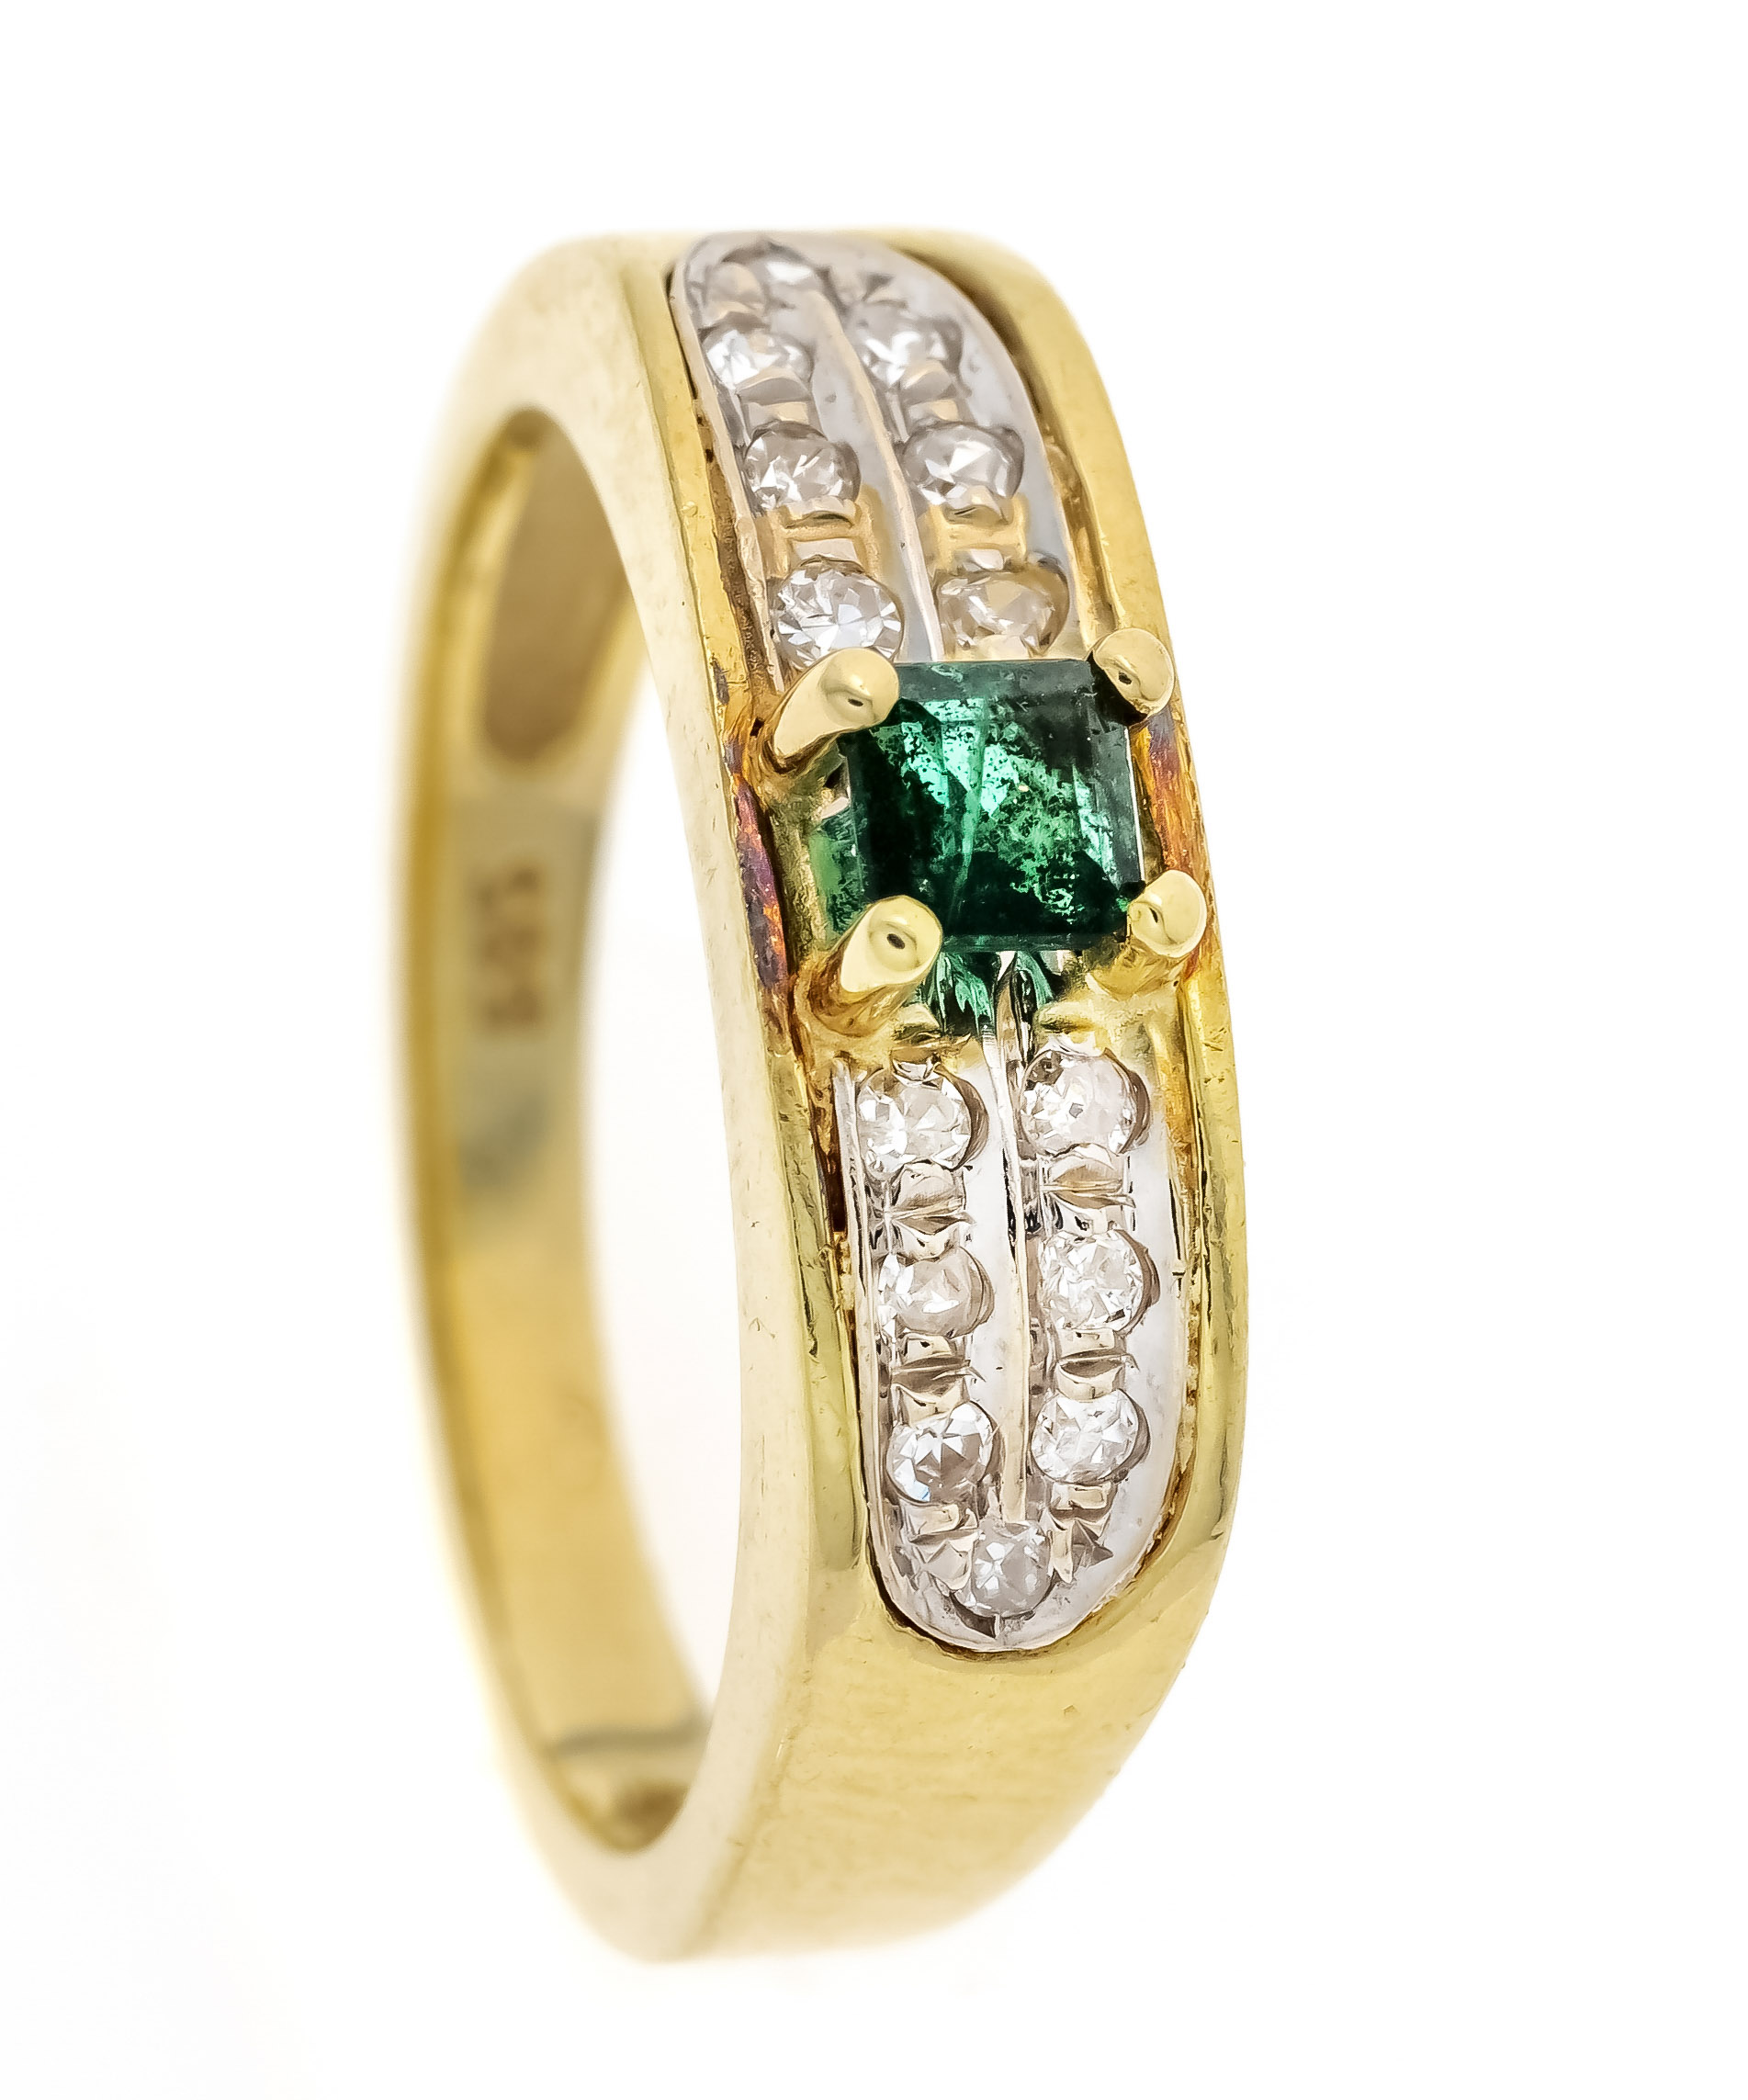 Emerald diamond ring GG/WG 585/000 with one faceted emerald 3 mm and 14 diamonds, RG 52, 3,8 g